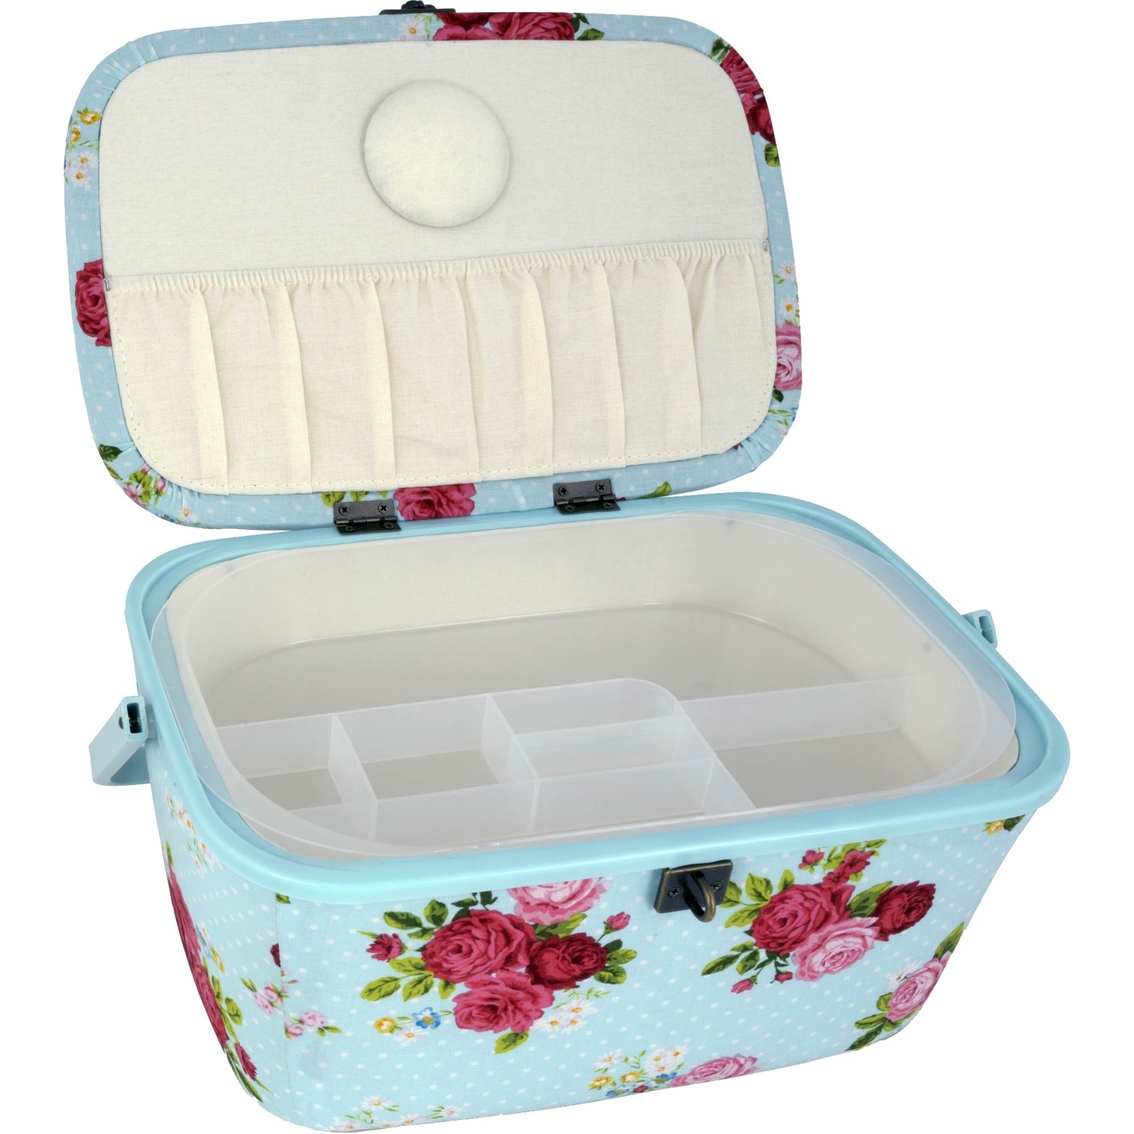 Dritz Oval Sewing Basket, Large - Image 2 of 3